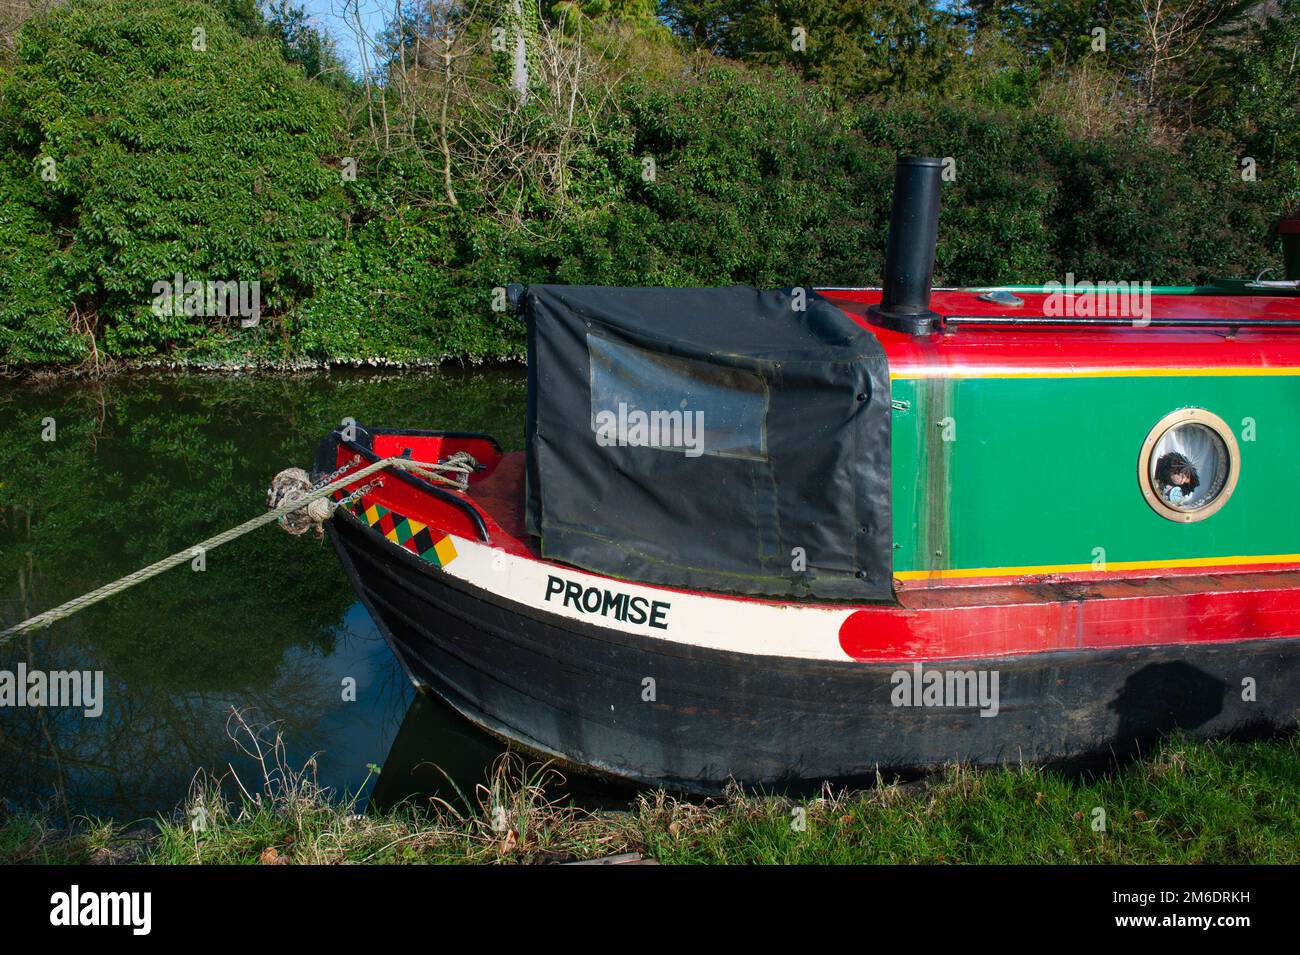 A Narrow boat called Promise moored on the Oxford canal in Oxford, England Stock Photo